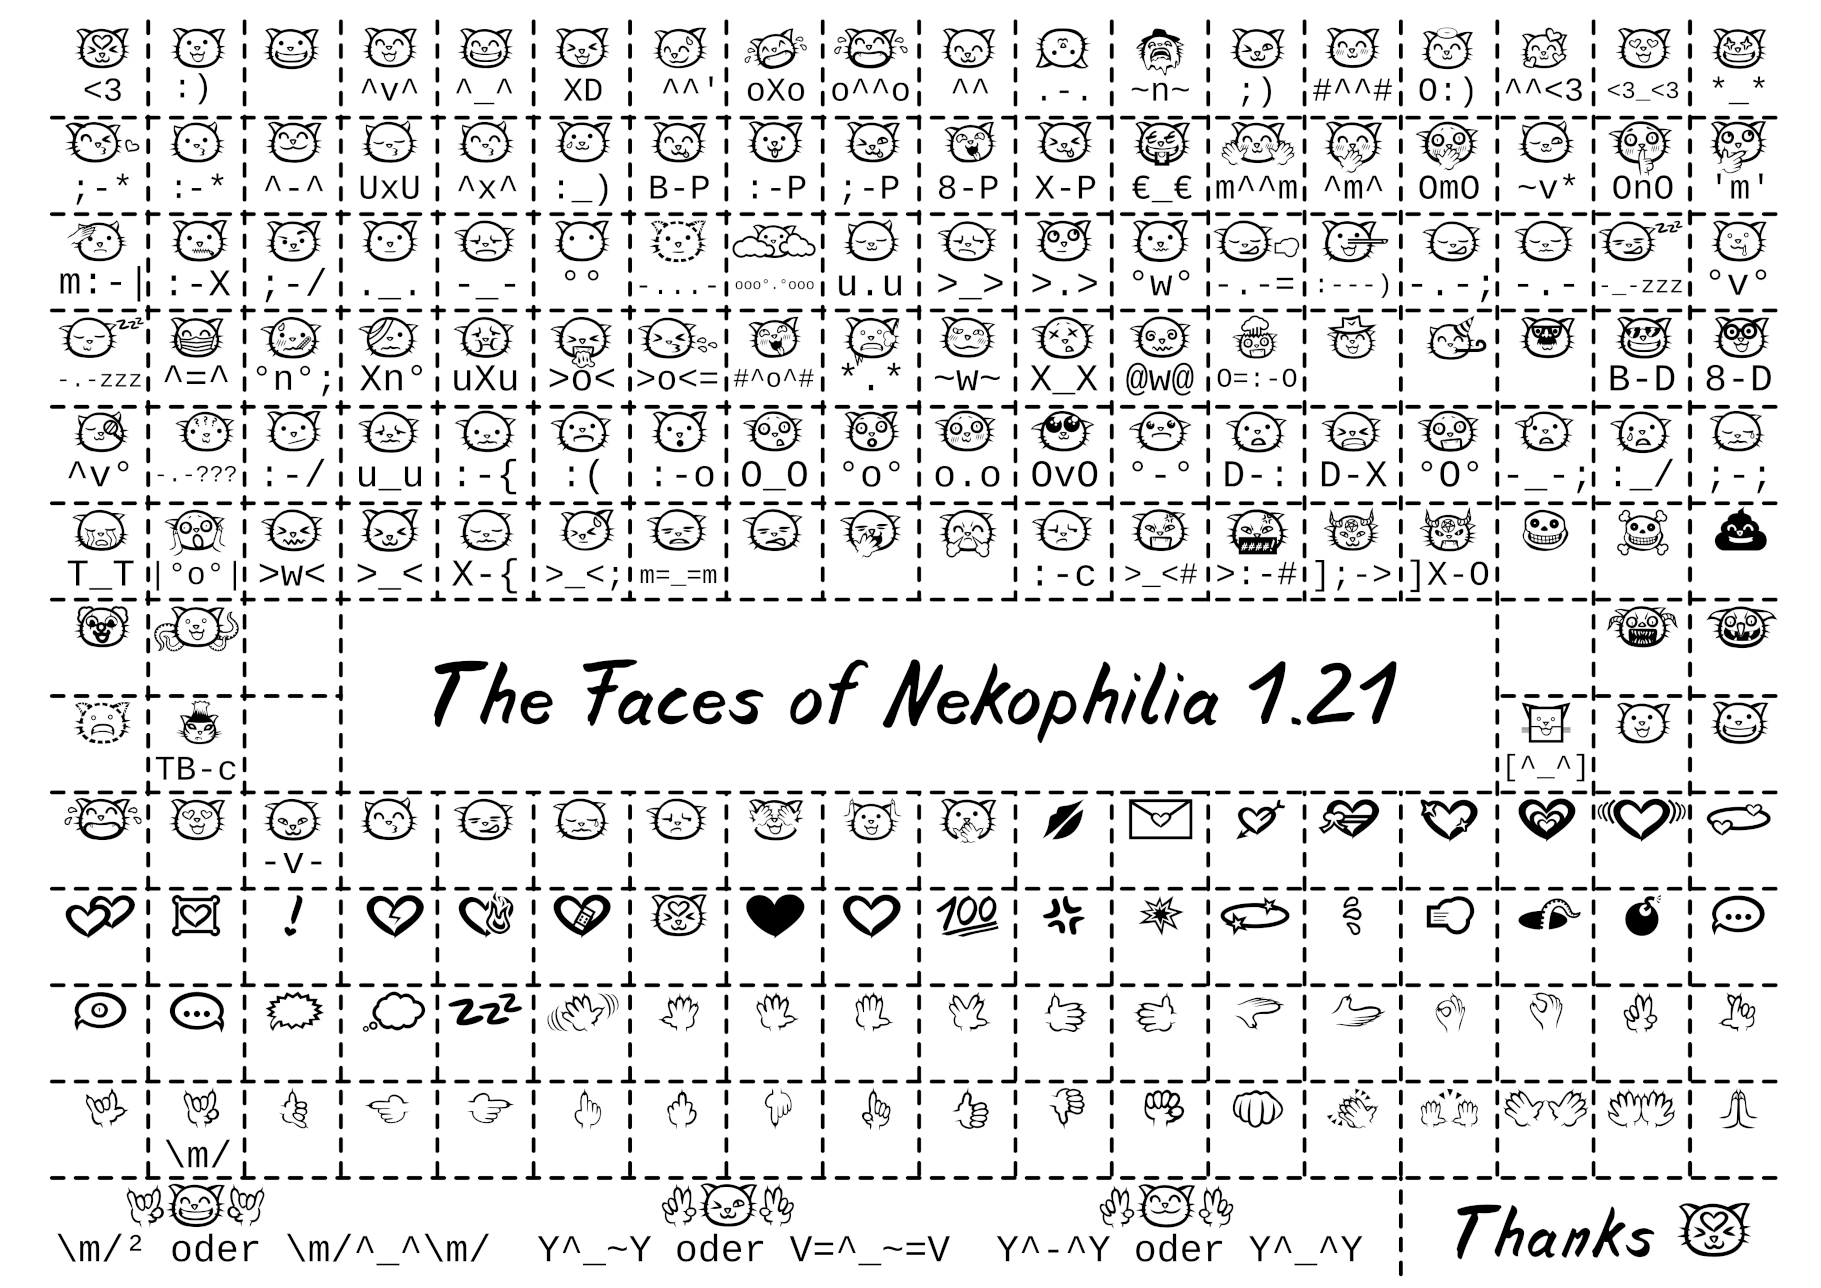 Poster with all of Nekophilia's emojis